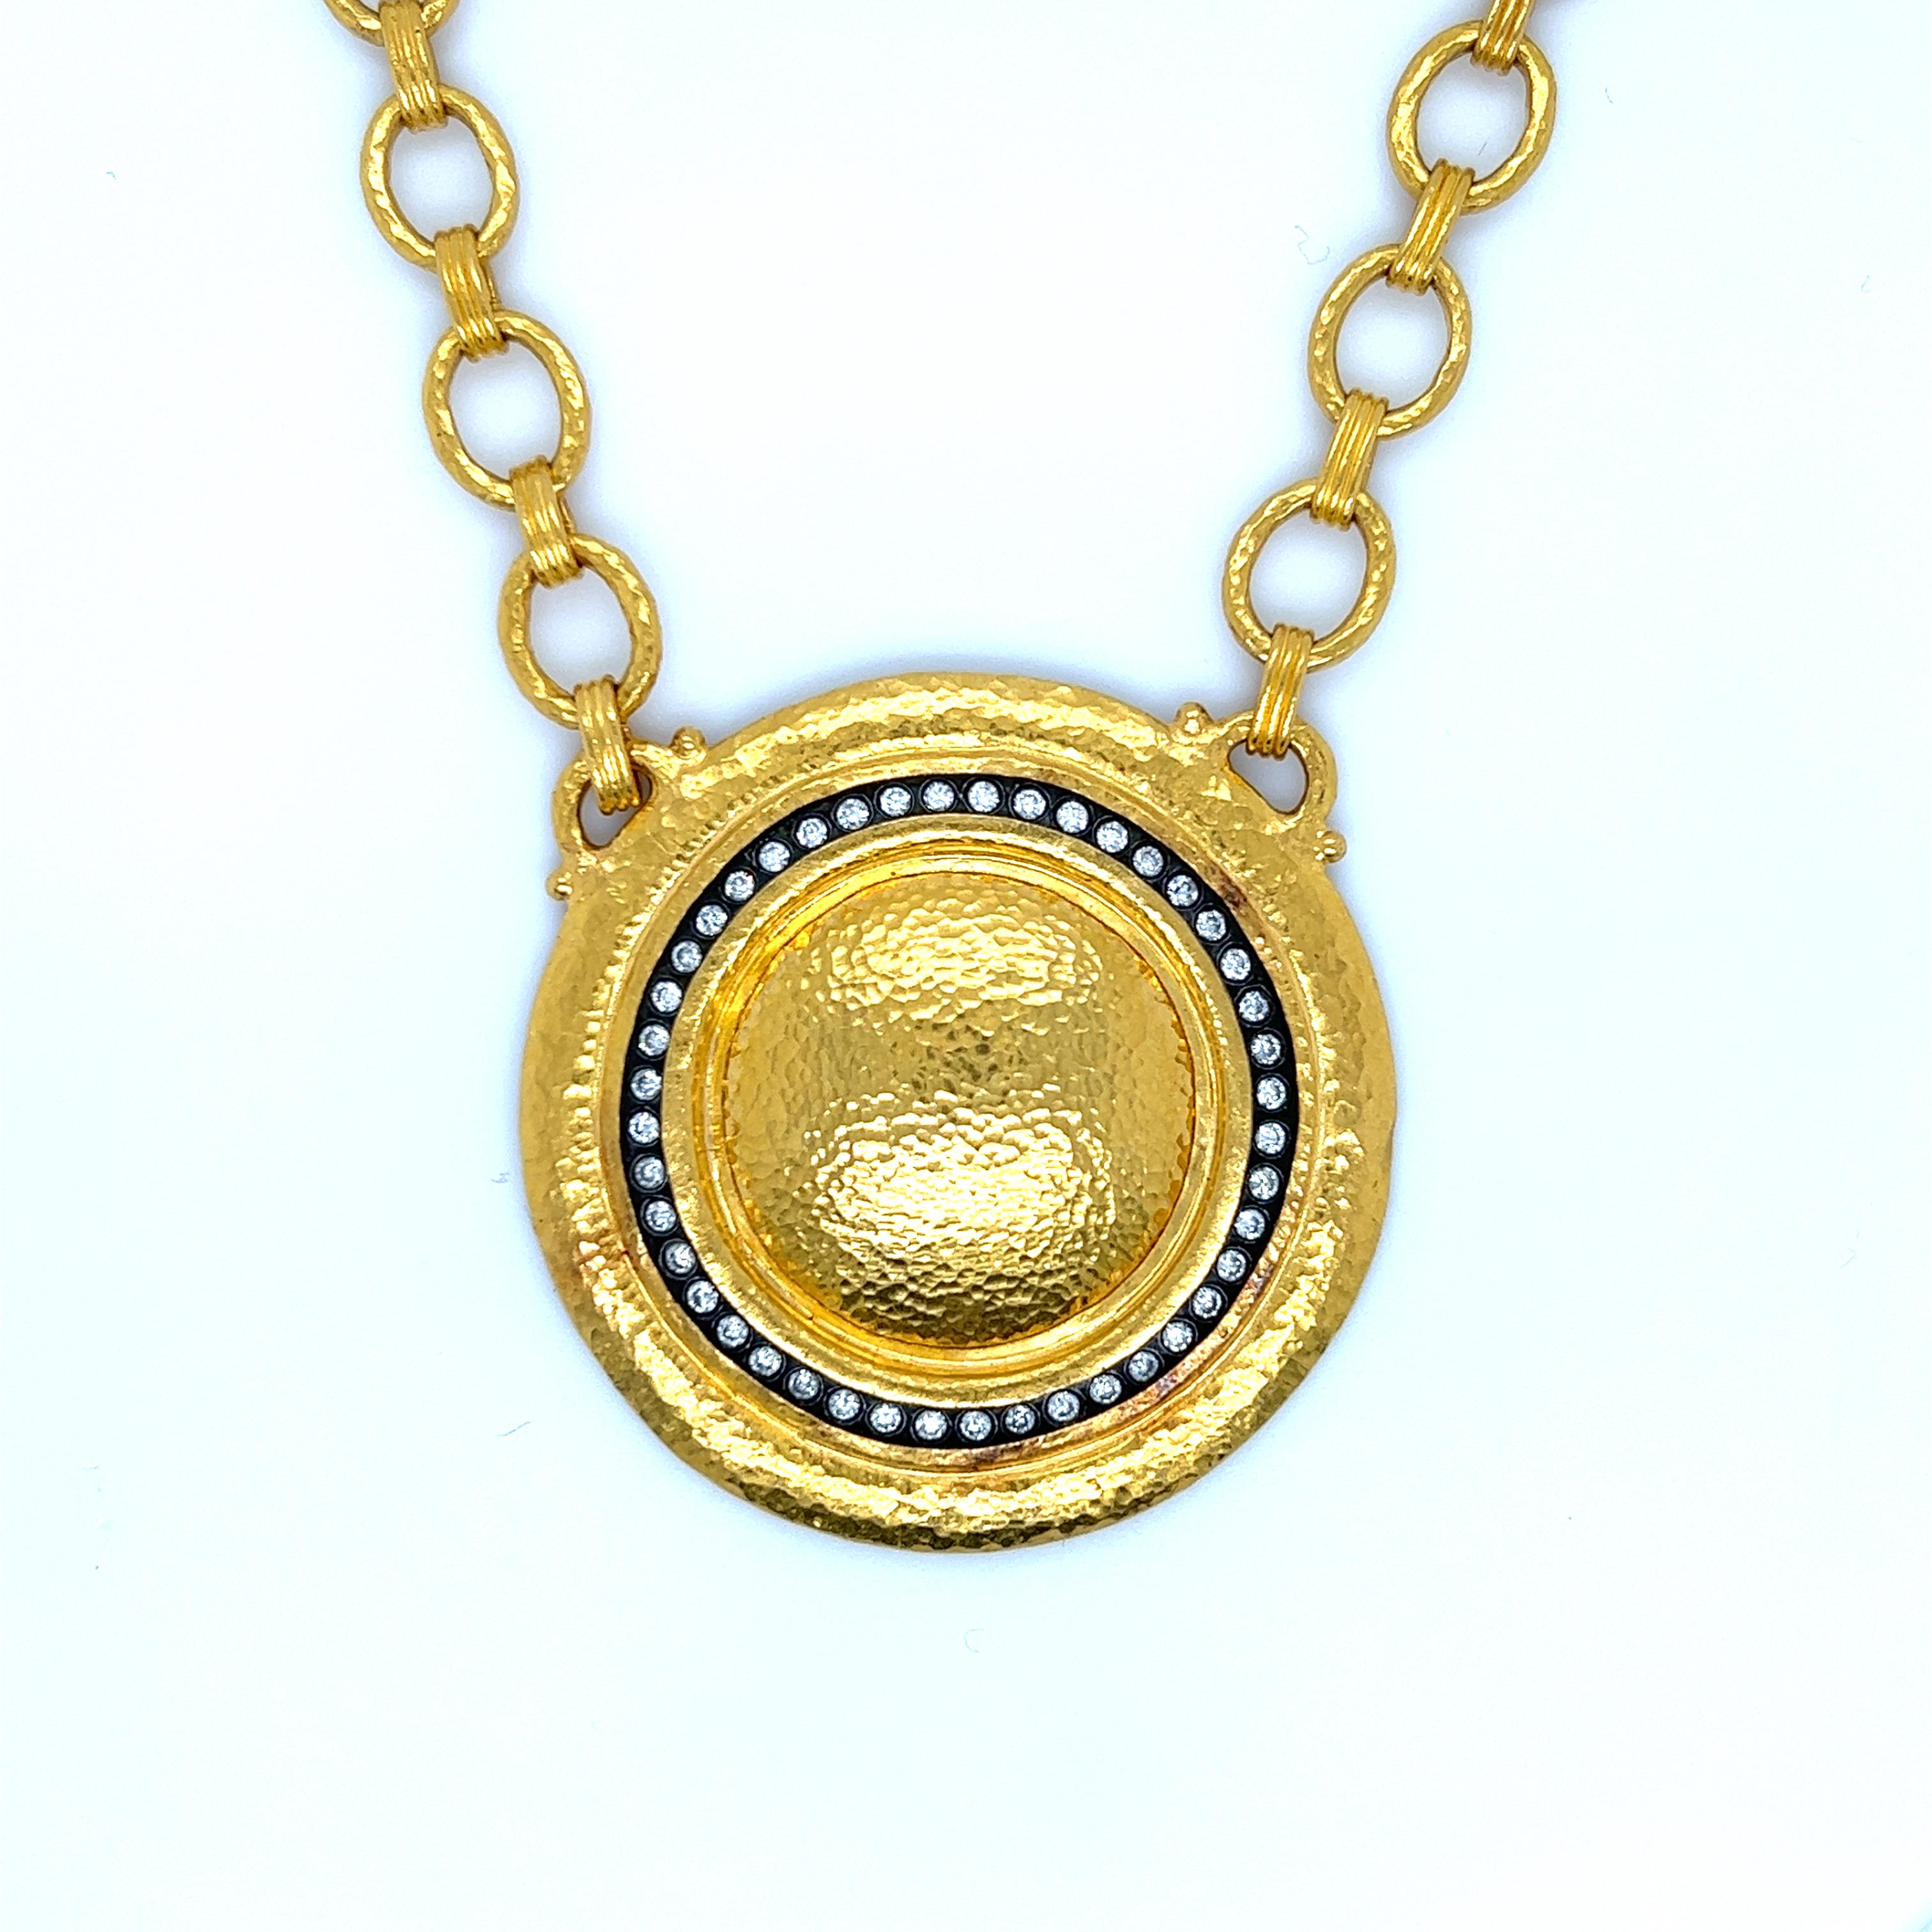 Beautiful hand crafted necklace by famed designer Gurhan. Gurhan is renowned for pioneering the revival of 24k gold and propelling it into popularity as a metal for contemporary fine jewelry design.
The necklace is very unique as it shows a hammered